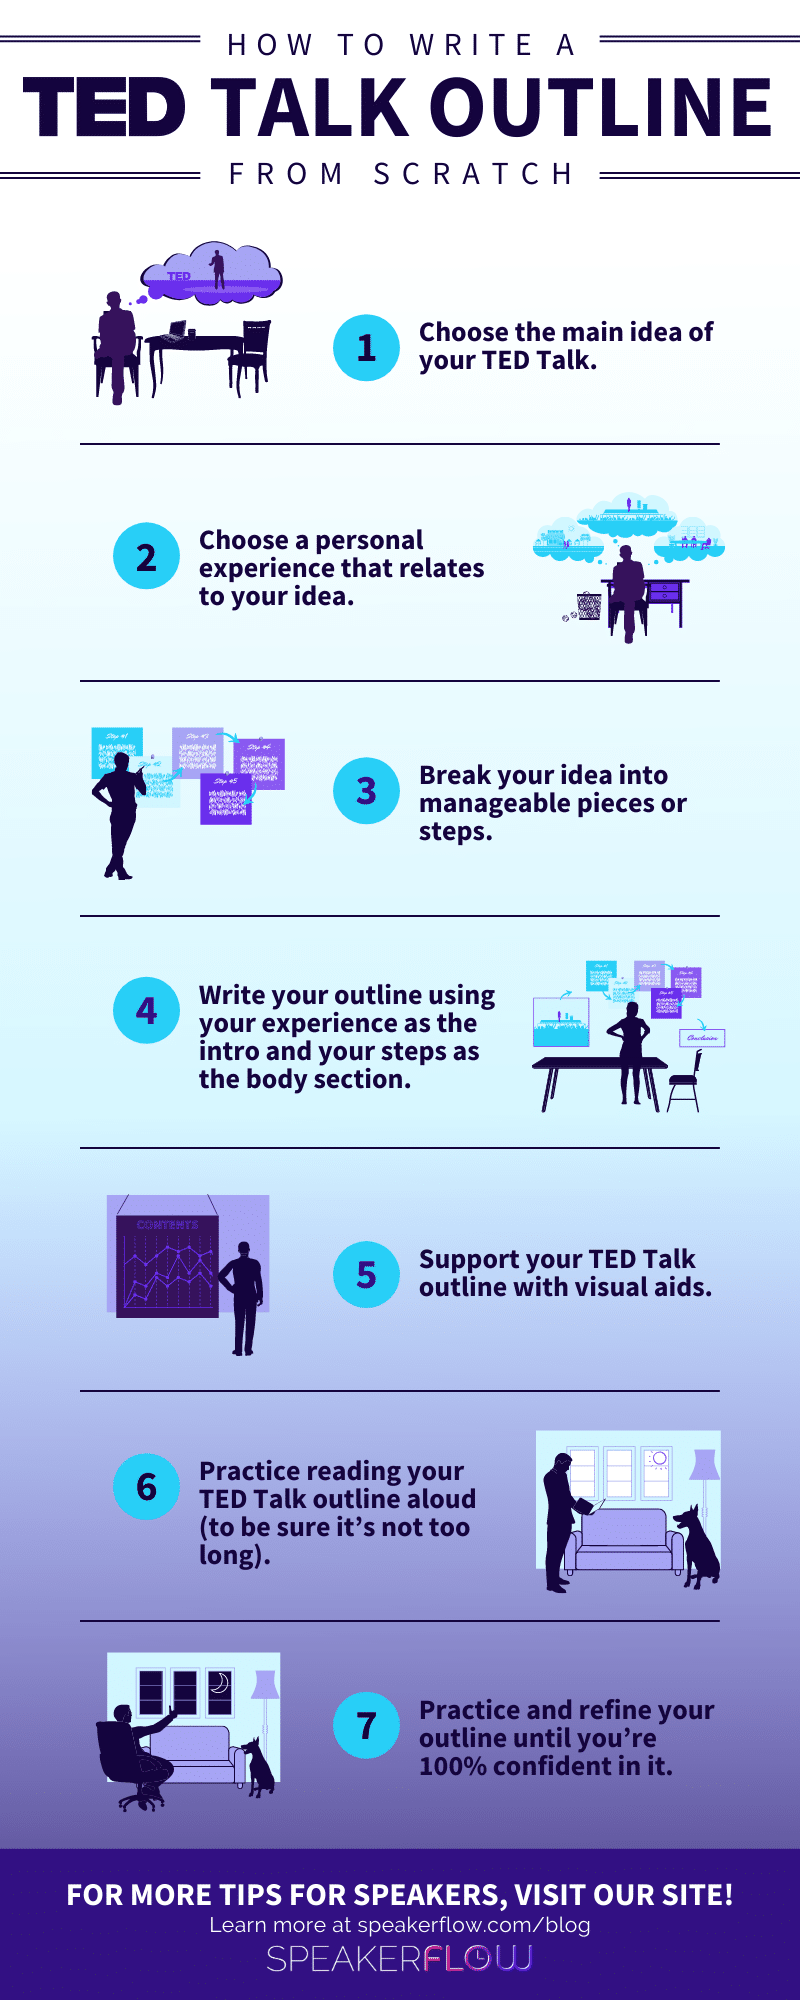 Infographic How To Write A TED Talk Outline From Scratch - SpeakerFlow